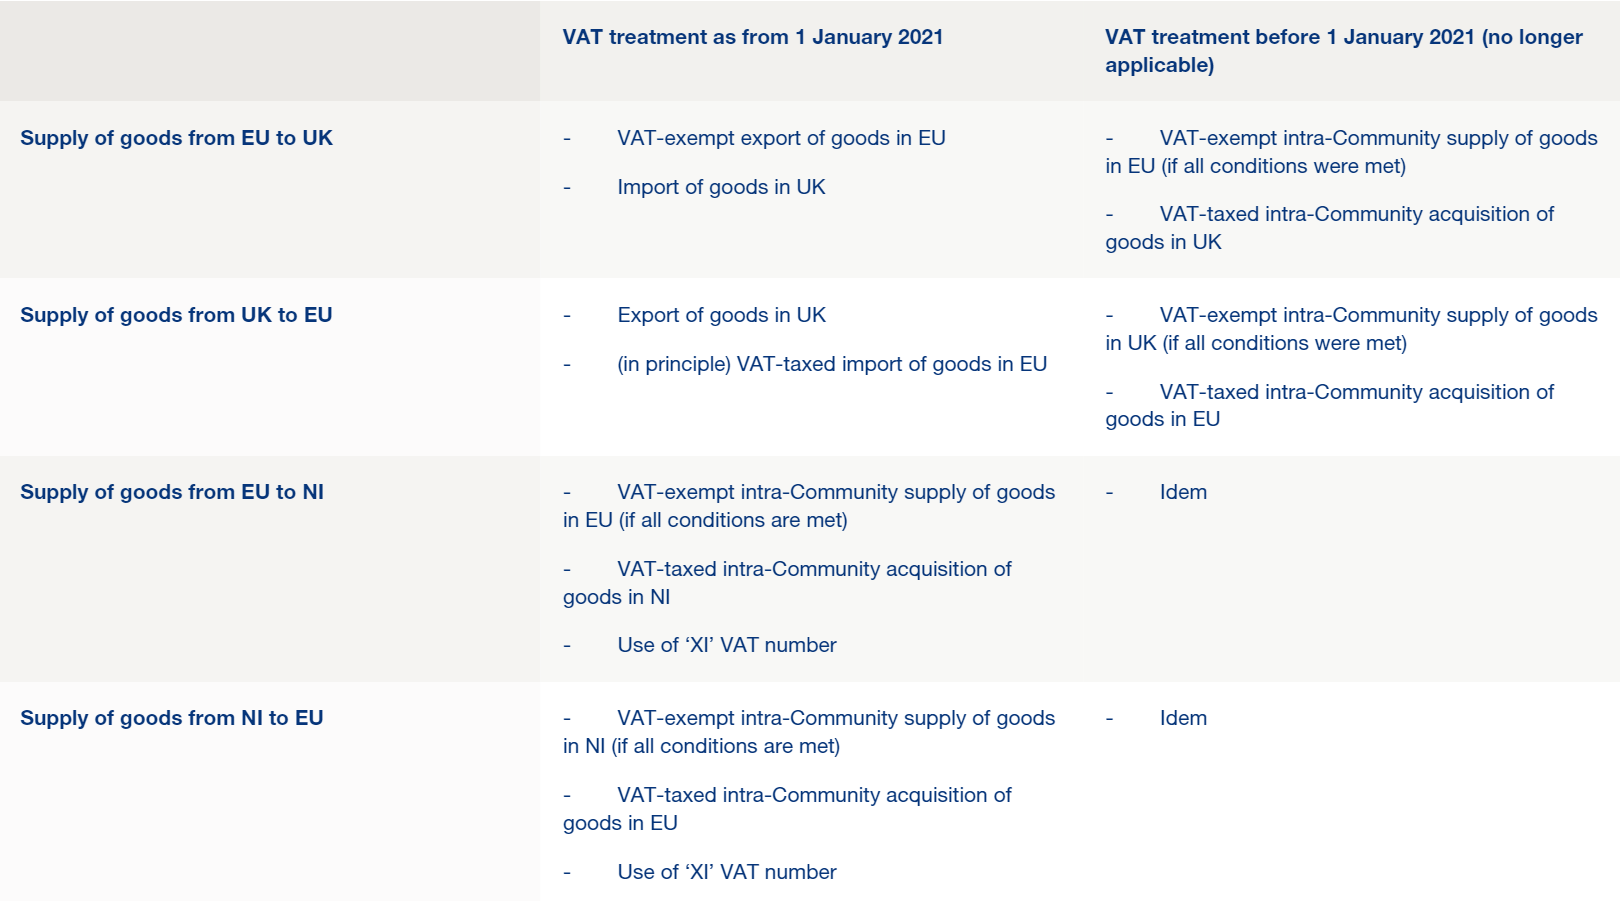 Overview of VAT treatment for supplies of goods